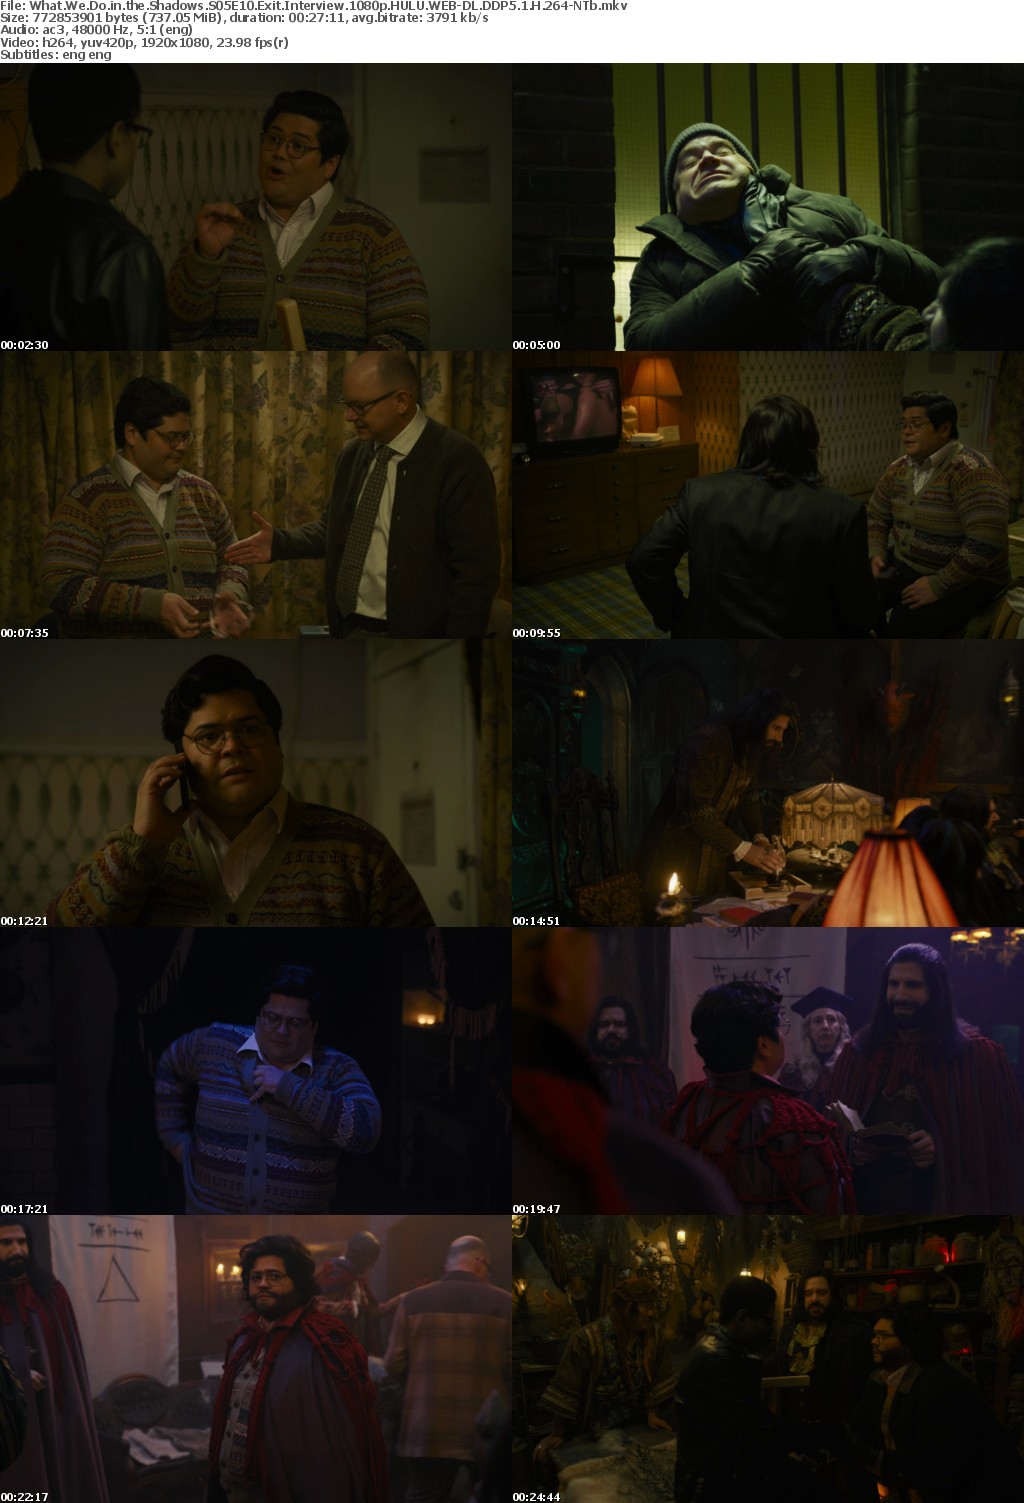 What We Do in the Shadows S05E10 Exit Interview 1080p HULU WEB-DL DDP5 1 H 264-NTb